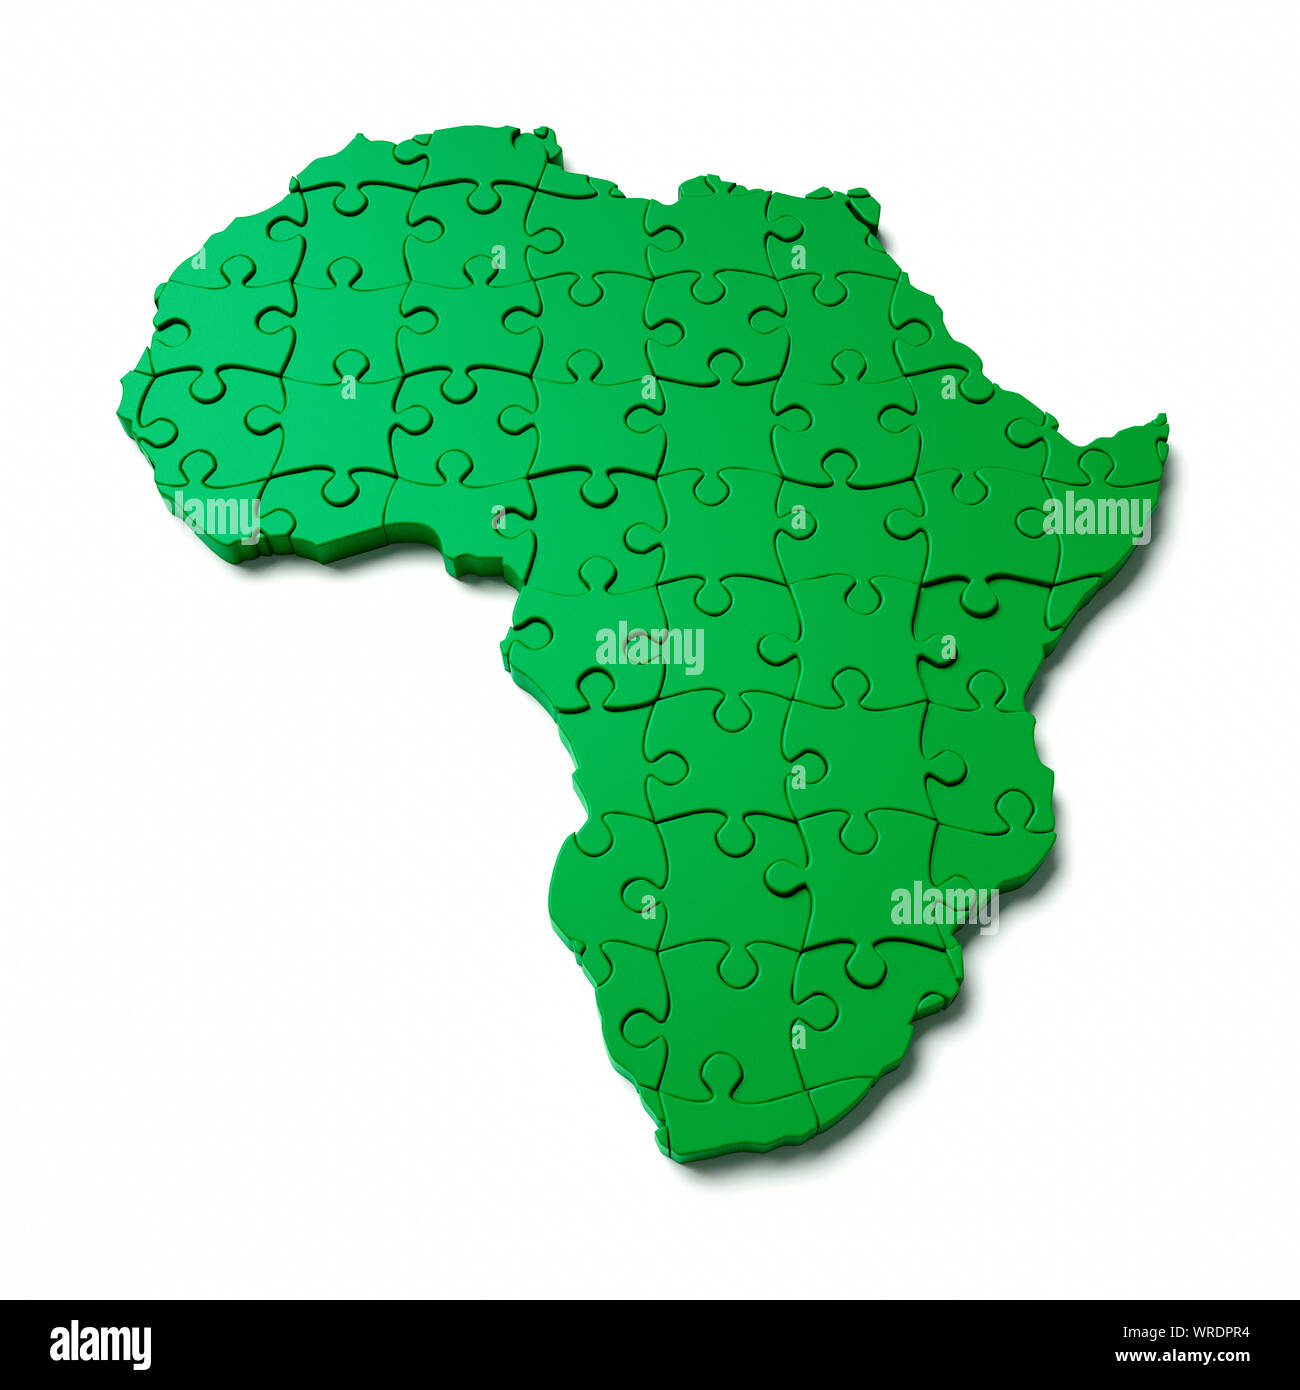 Continent of Africa as a green jigsaw puzzle Stock Photo